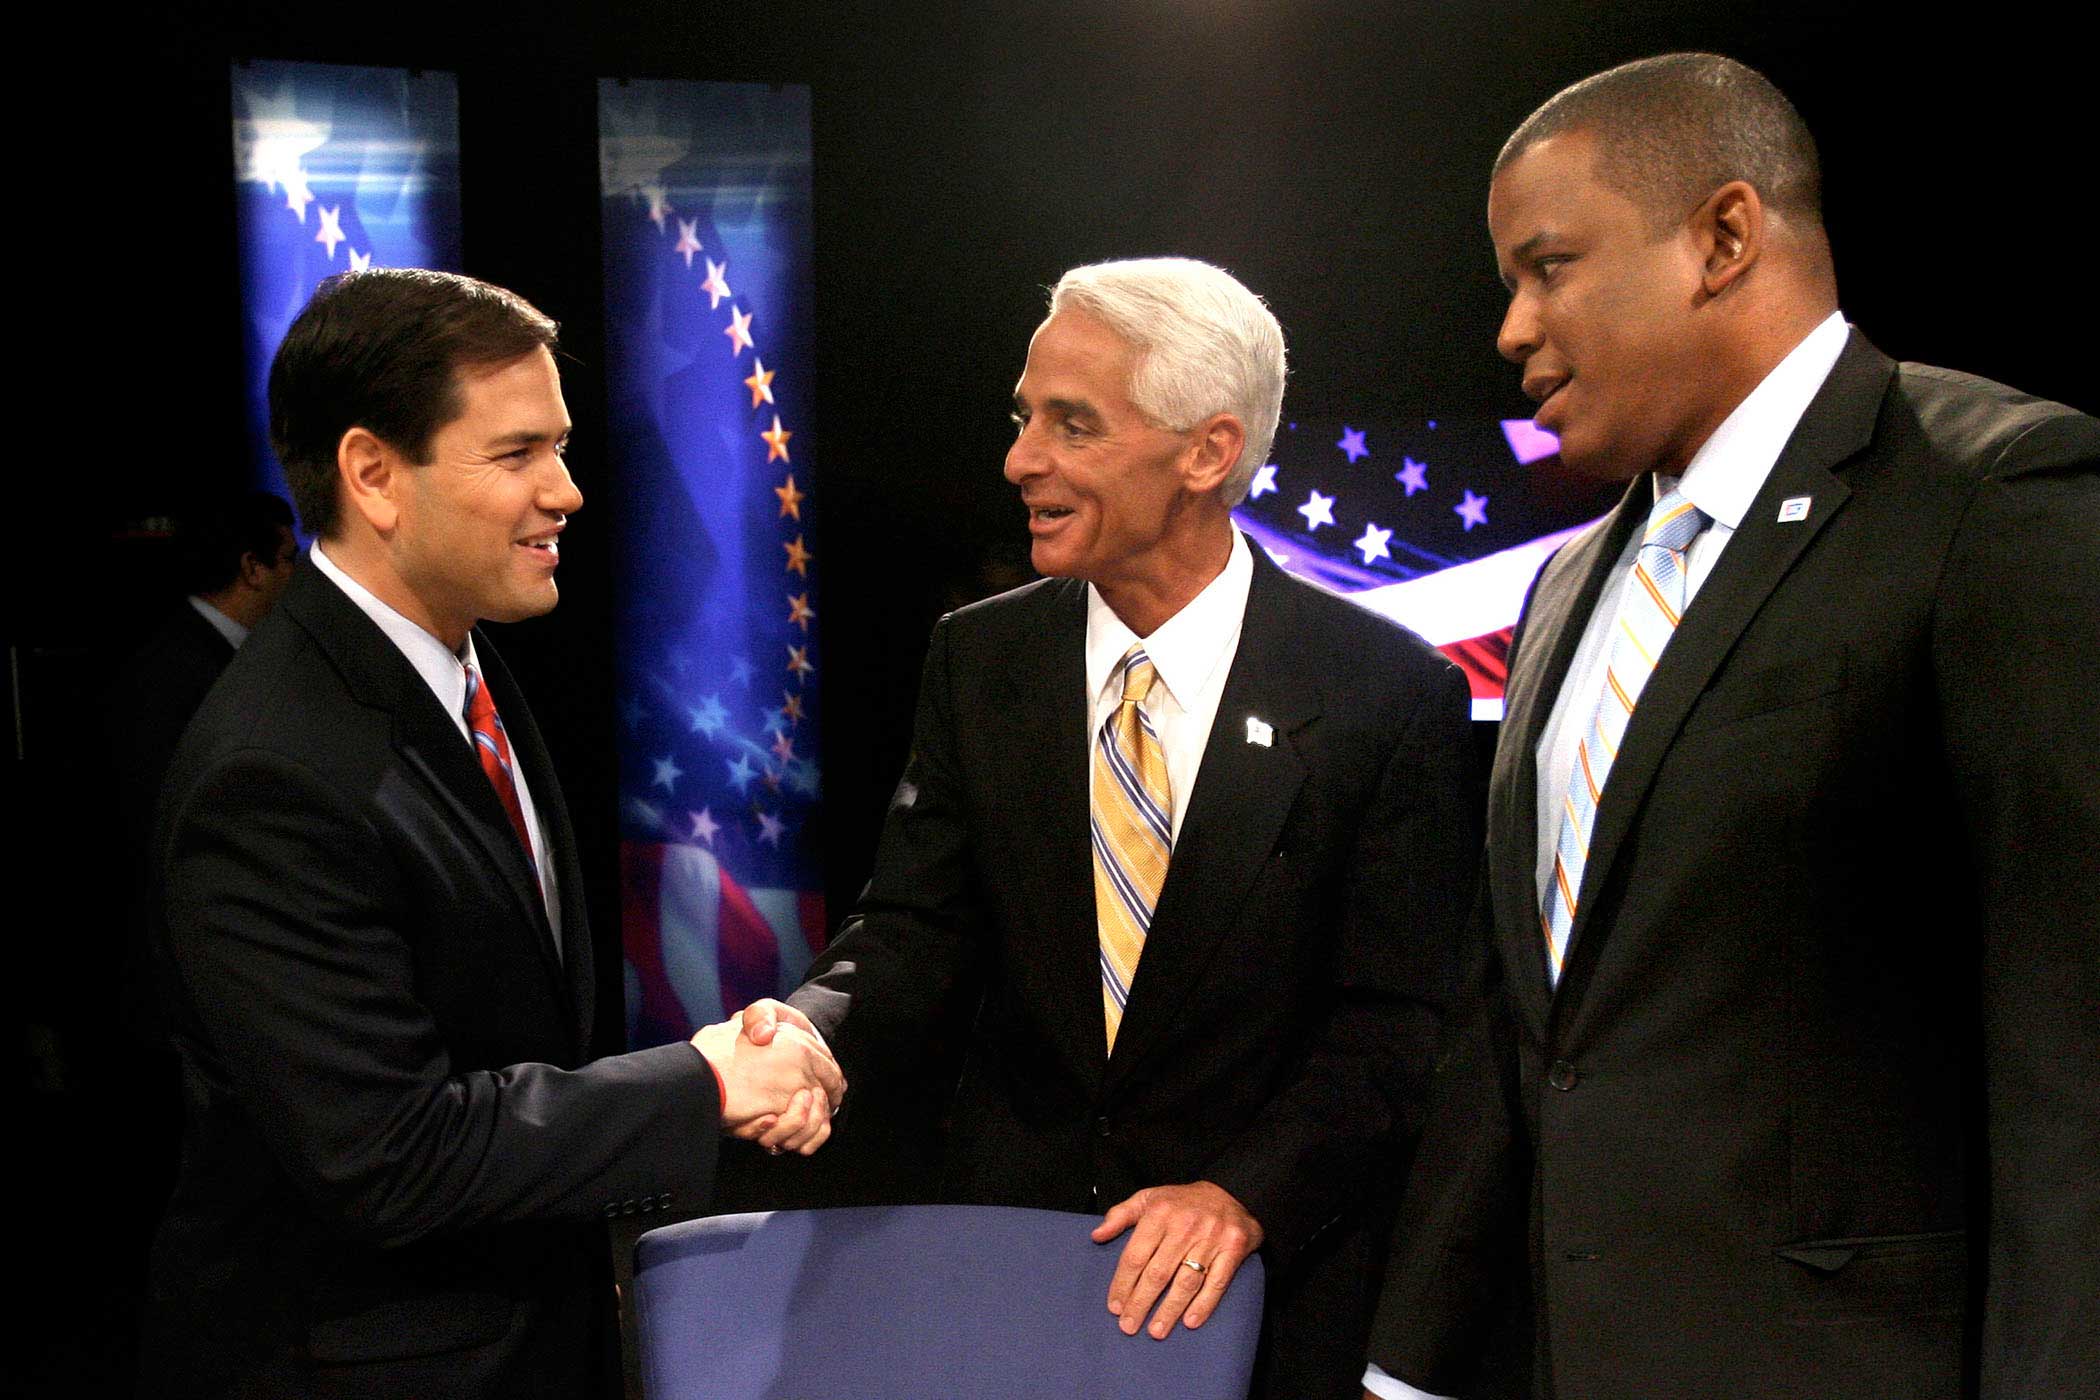 From left, Marco Rubio, Charlie Crist and Kendrick Meek greet each other before the start of their debate at the studios of WESH-TV in Winter Park, Fla., on Oct. 26, 2010.